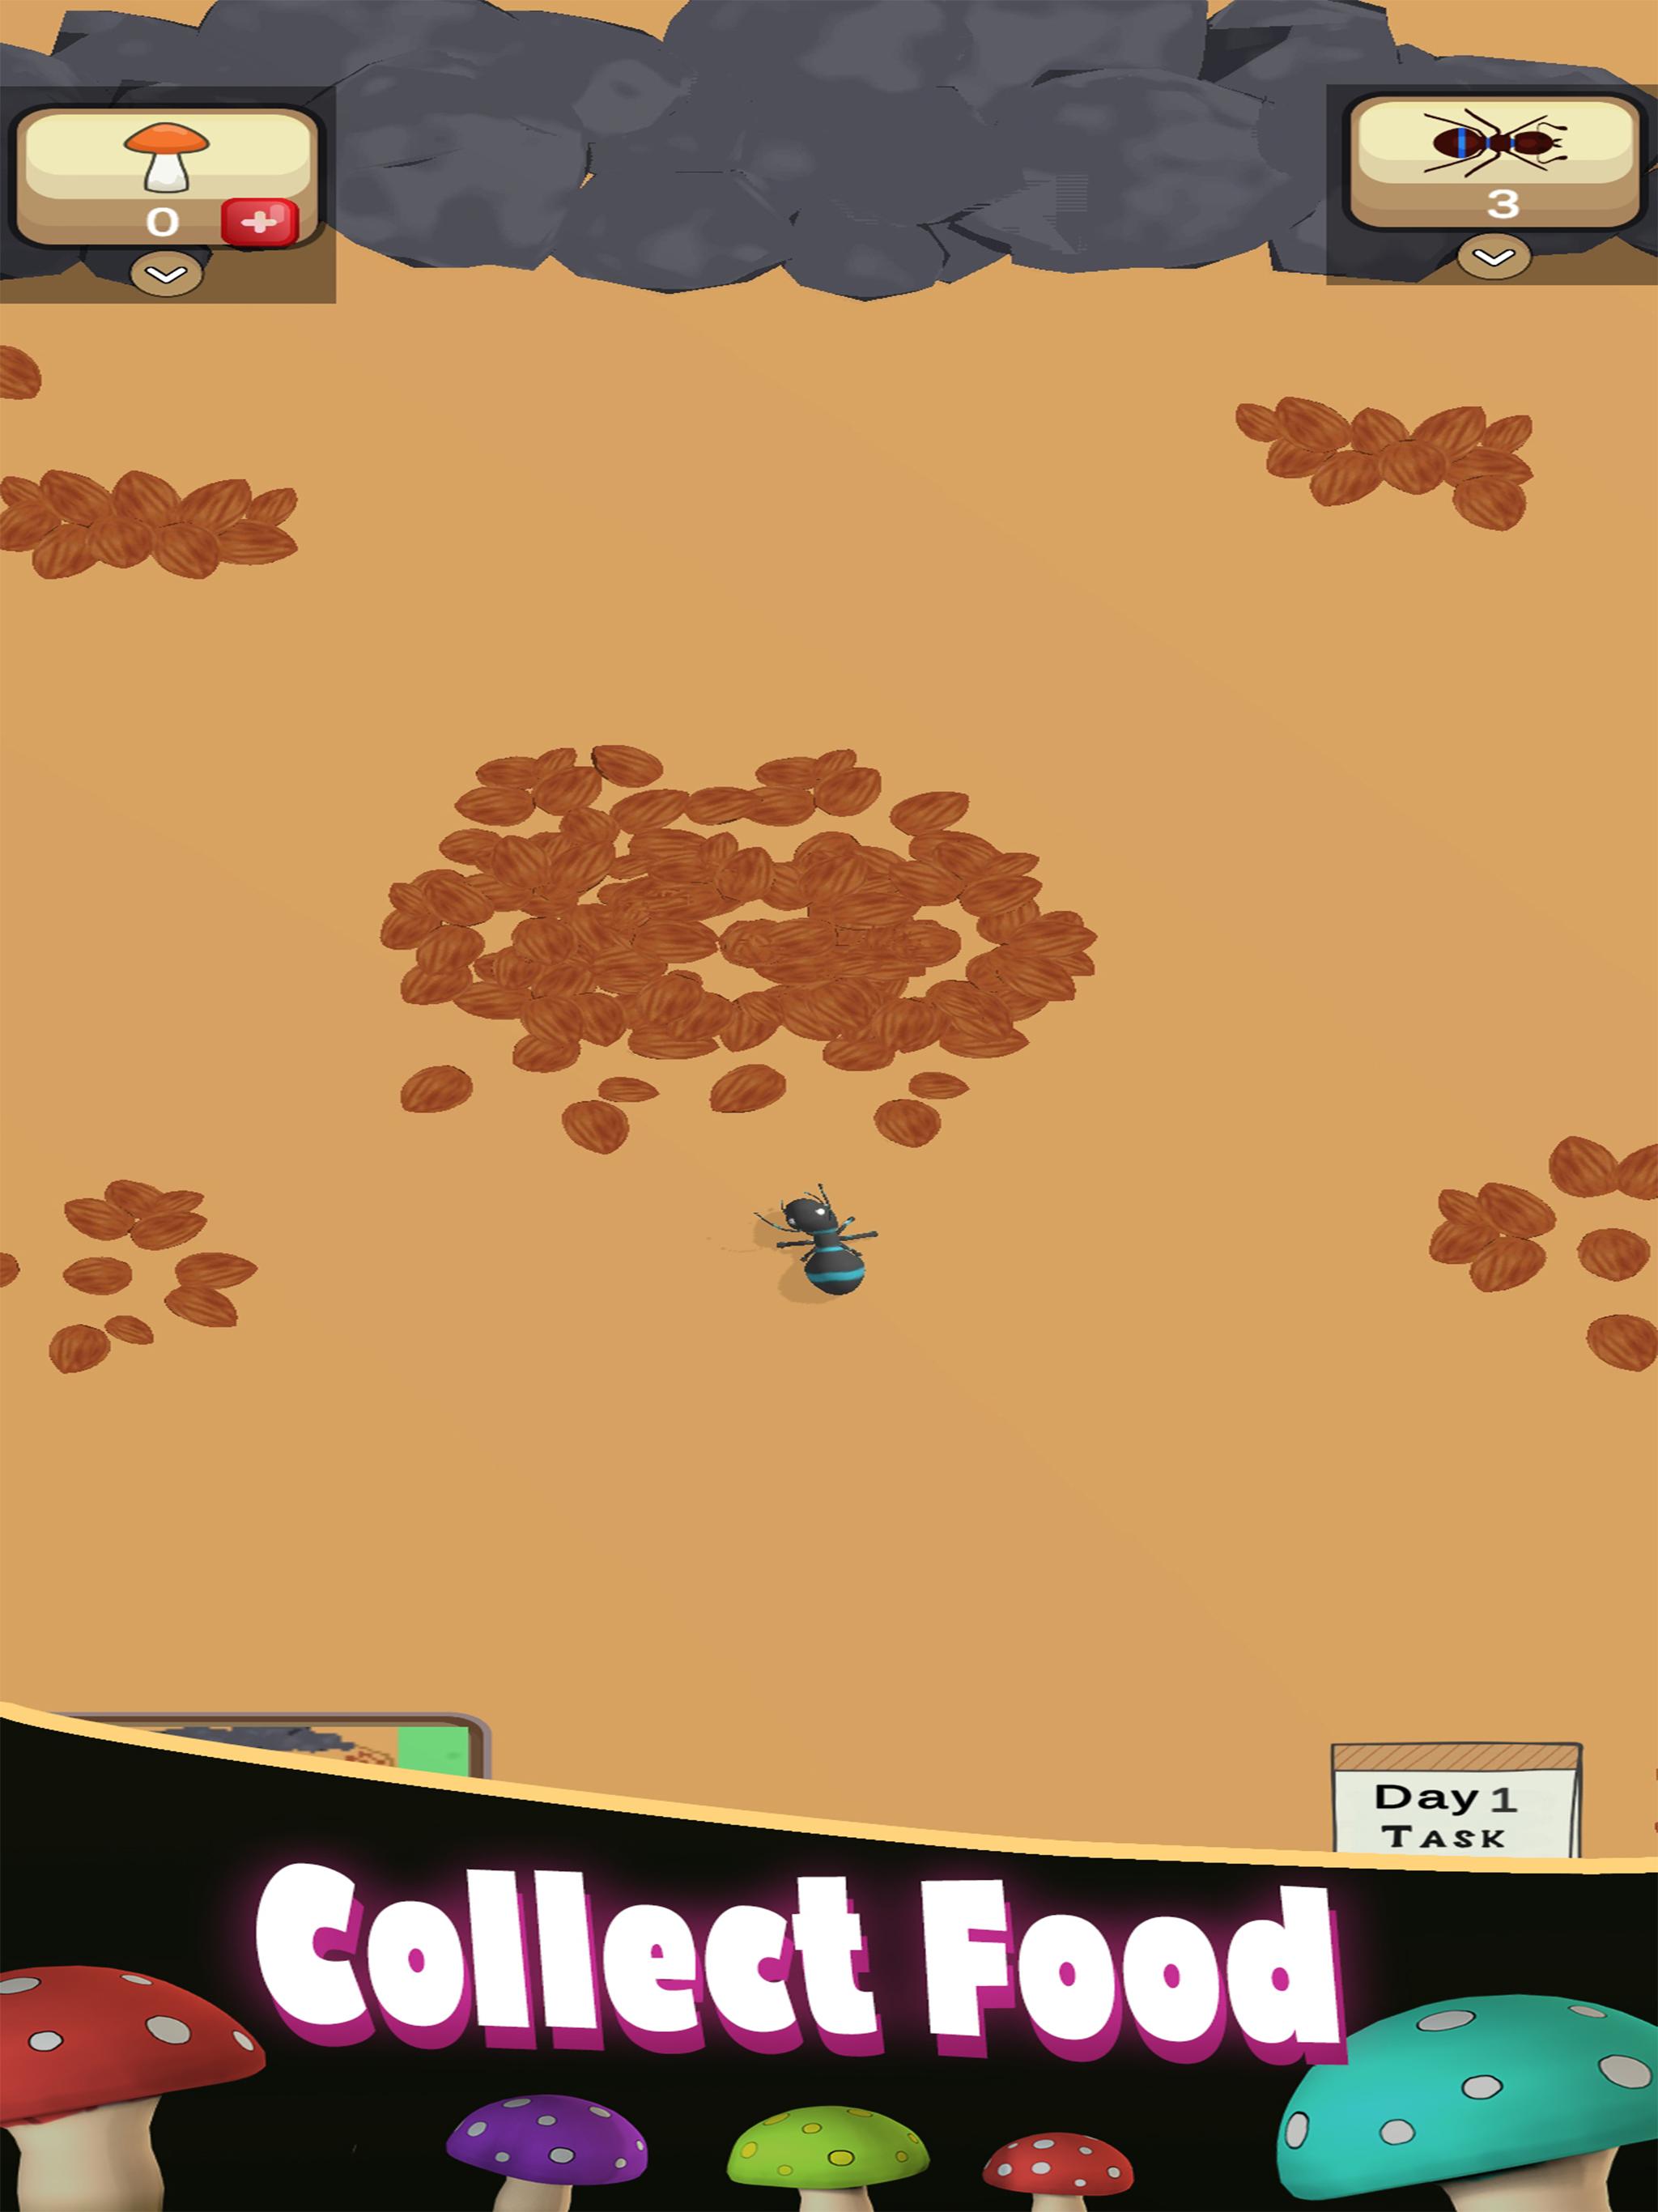 Ant Colony 3D: The Anthill Simulator Idle Games 2.7 Screenshot 14